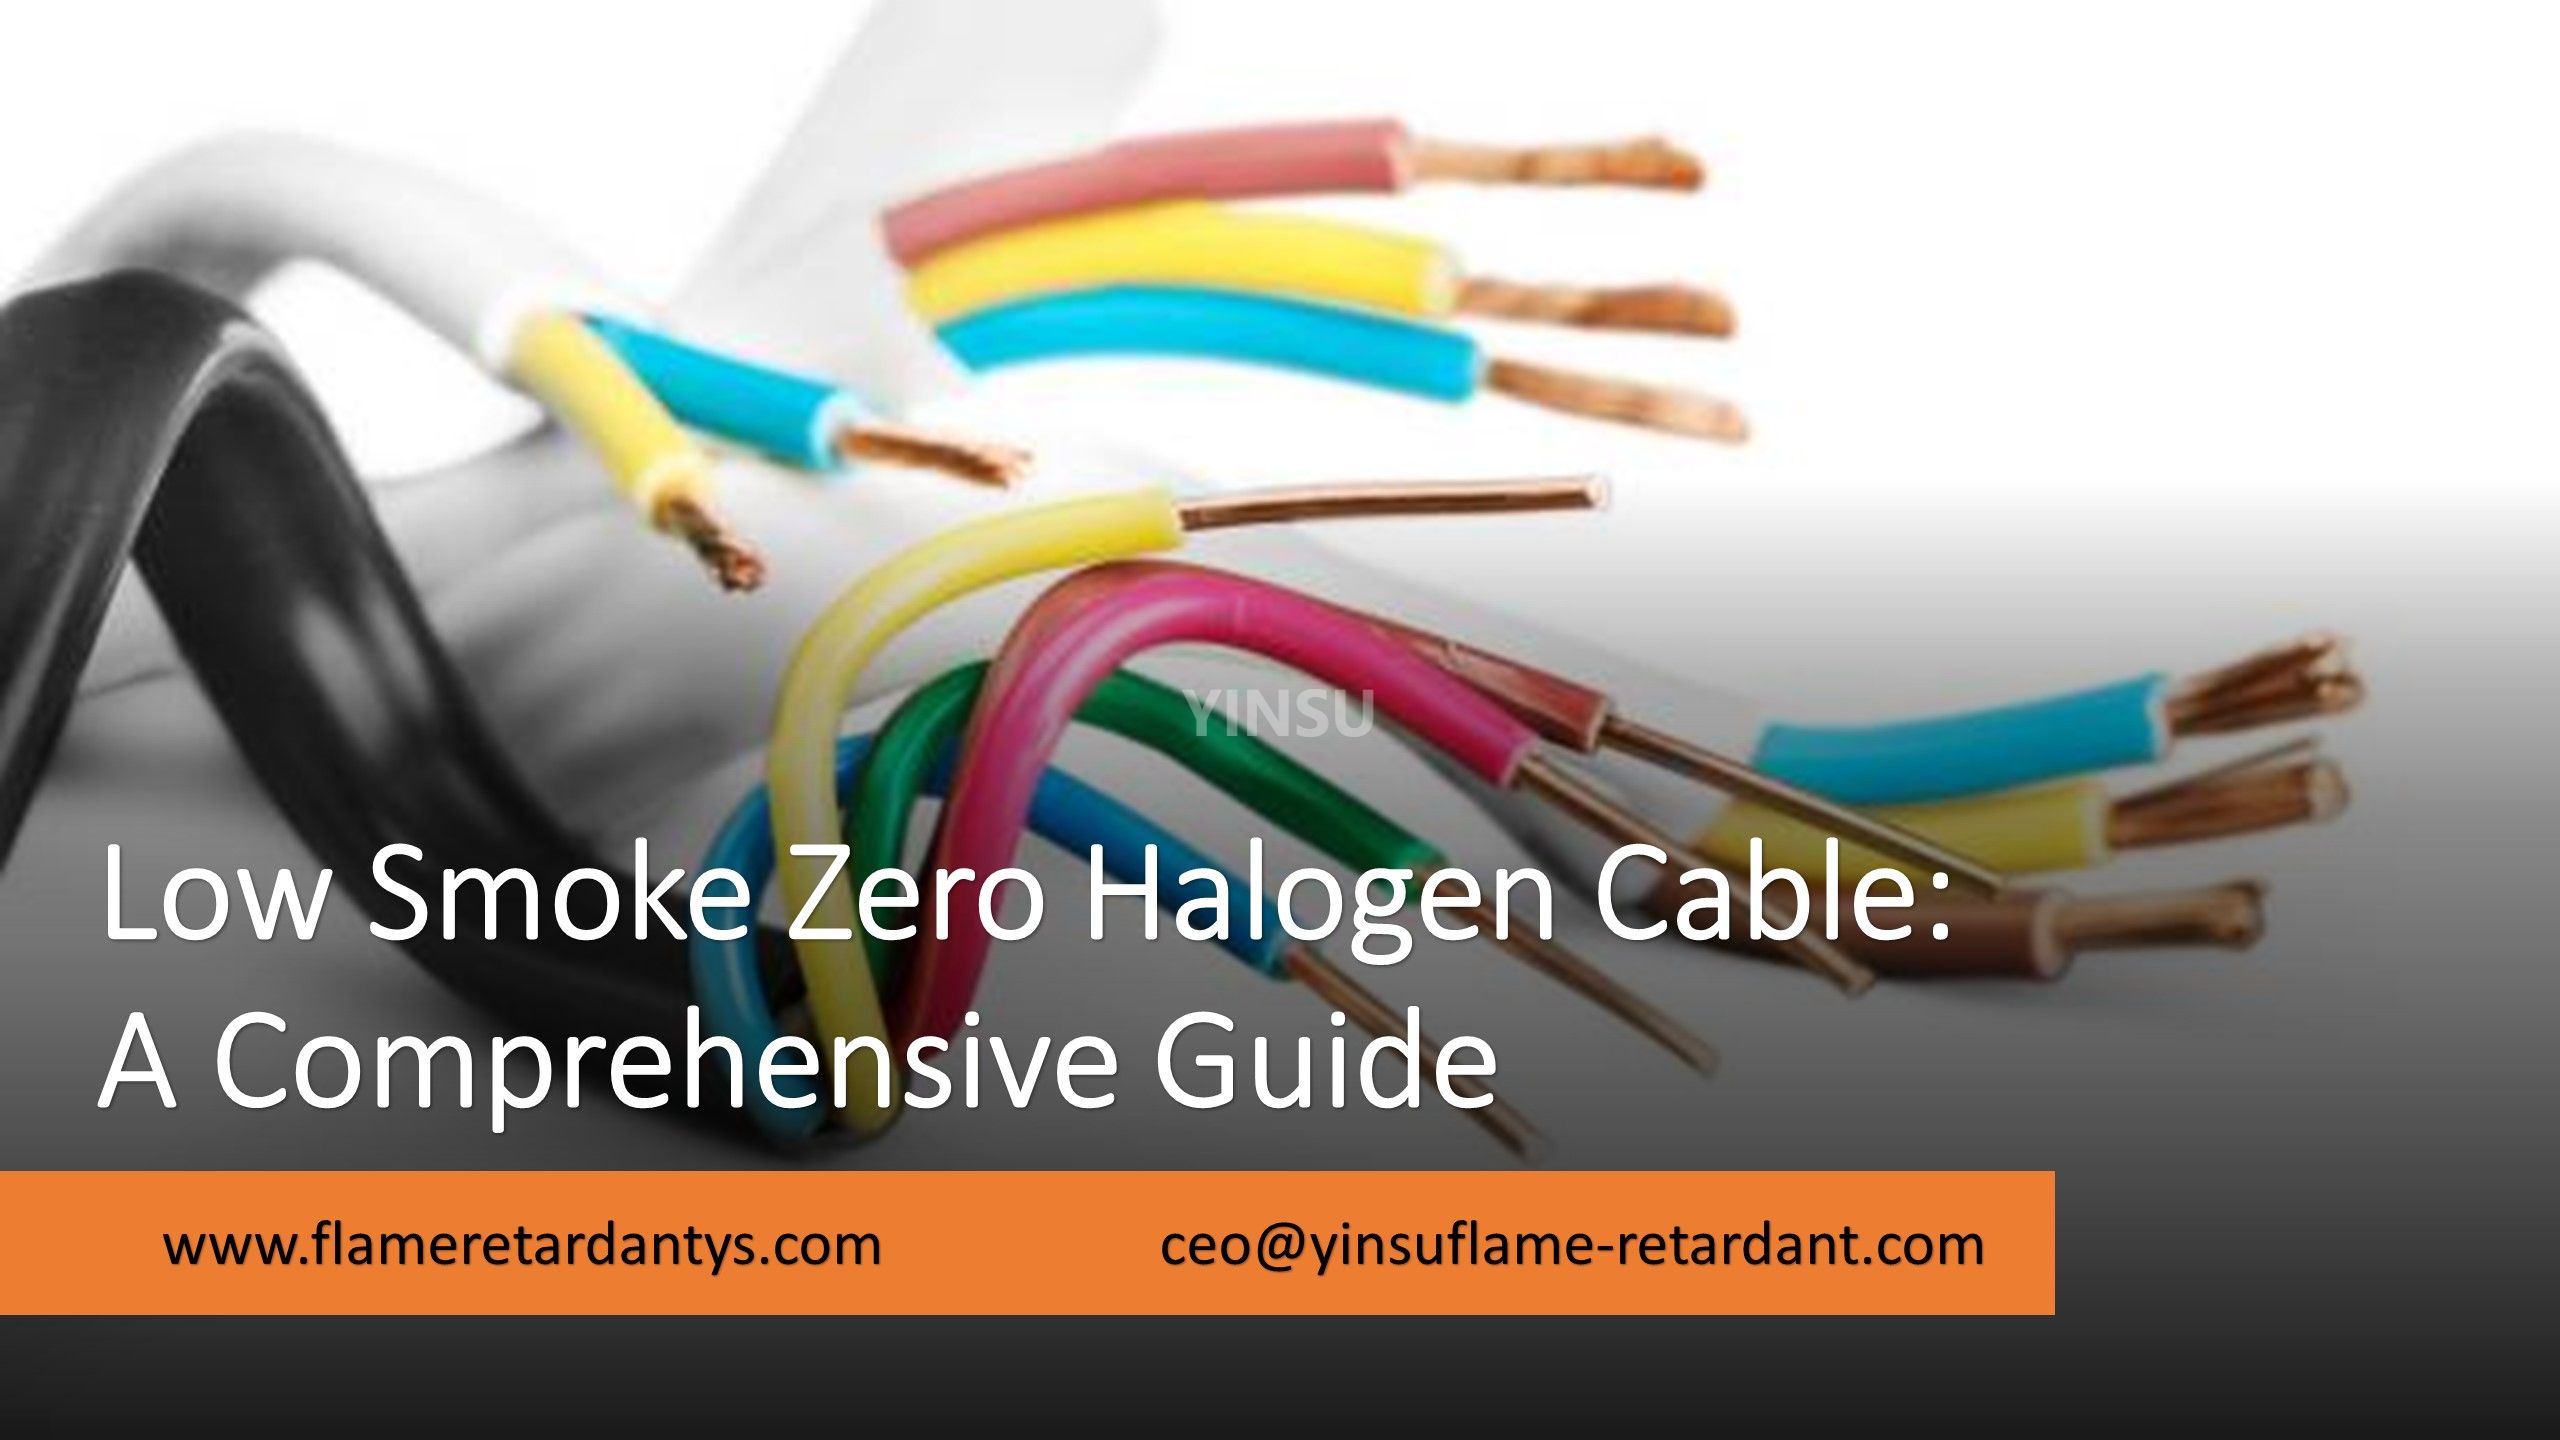 2. Low Smoke Zero Halogen Cable A Comprehensive Guide